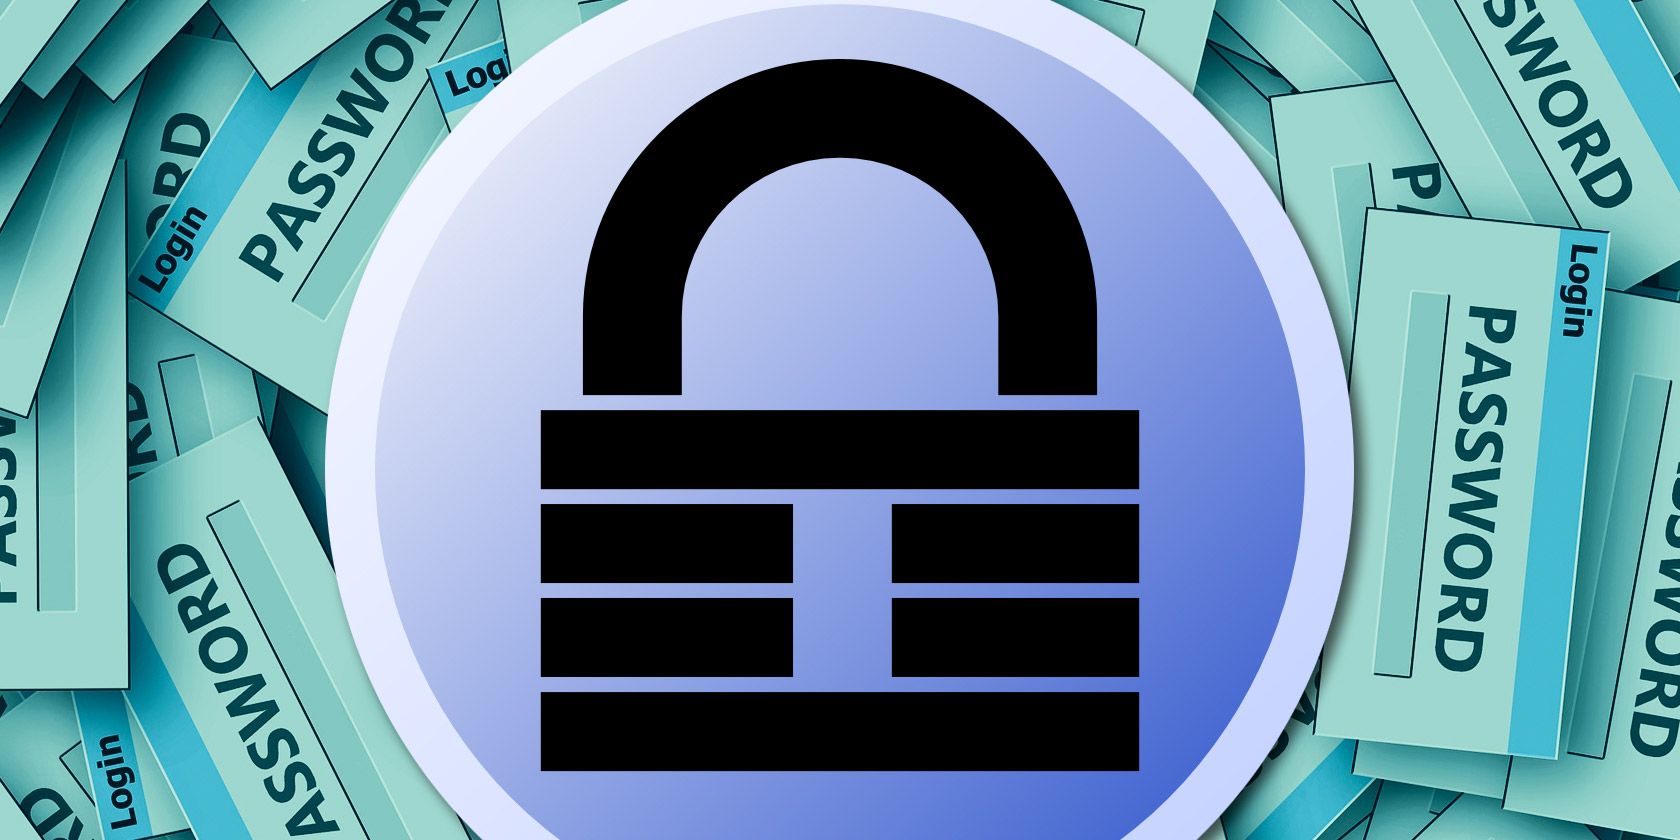 8 Plugins to Extend & Secure Your KeePass Password Database